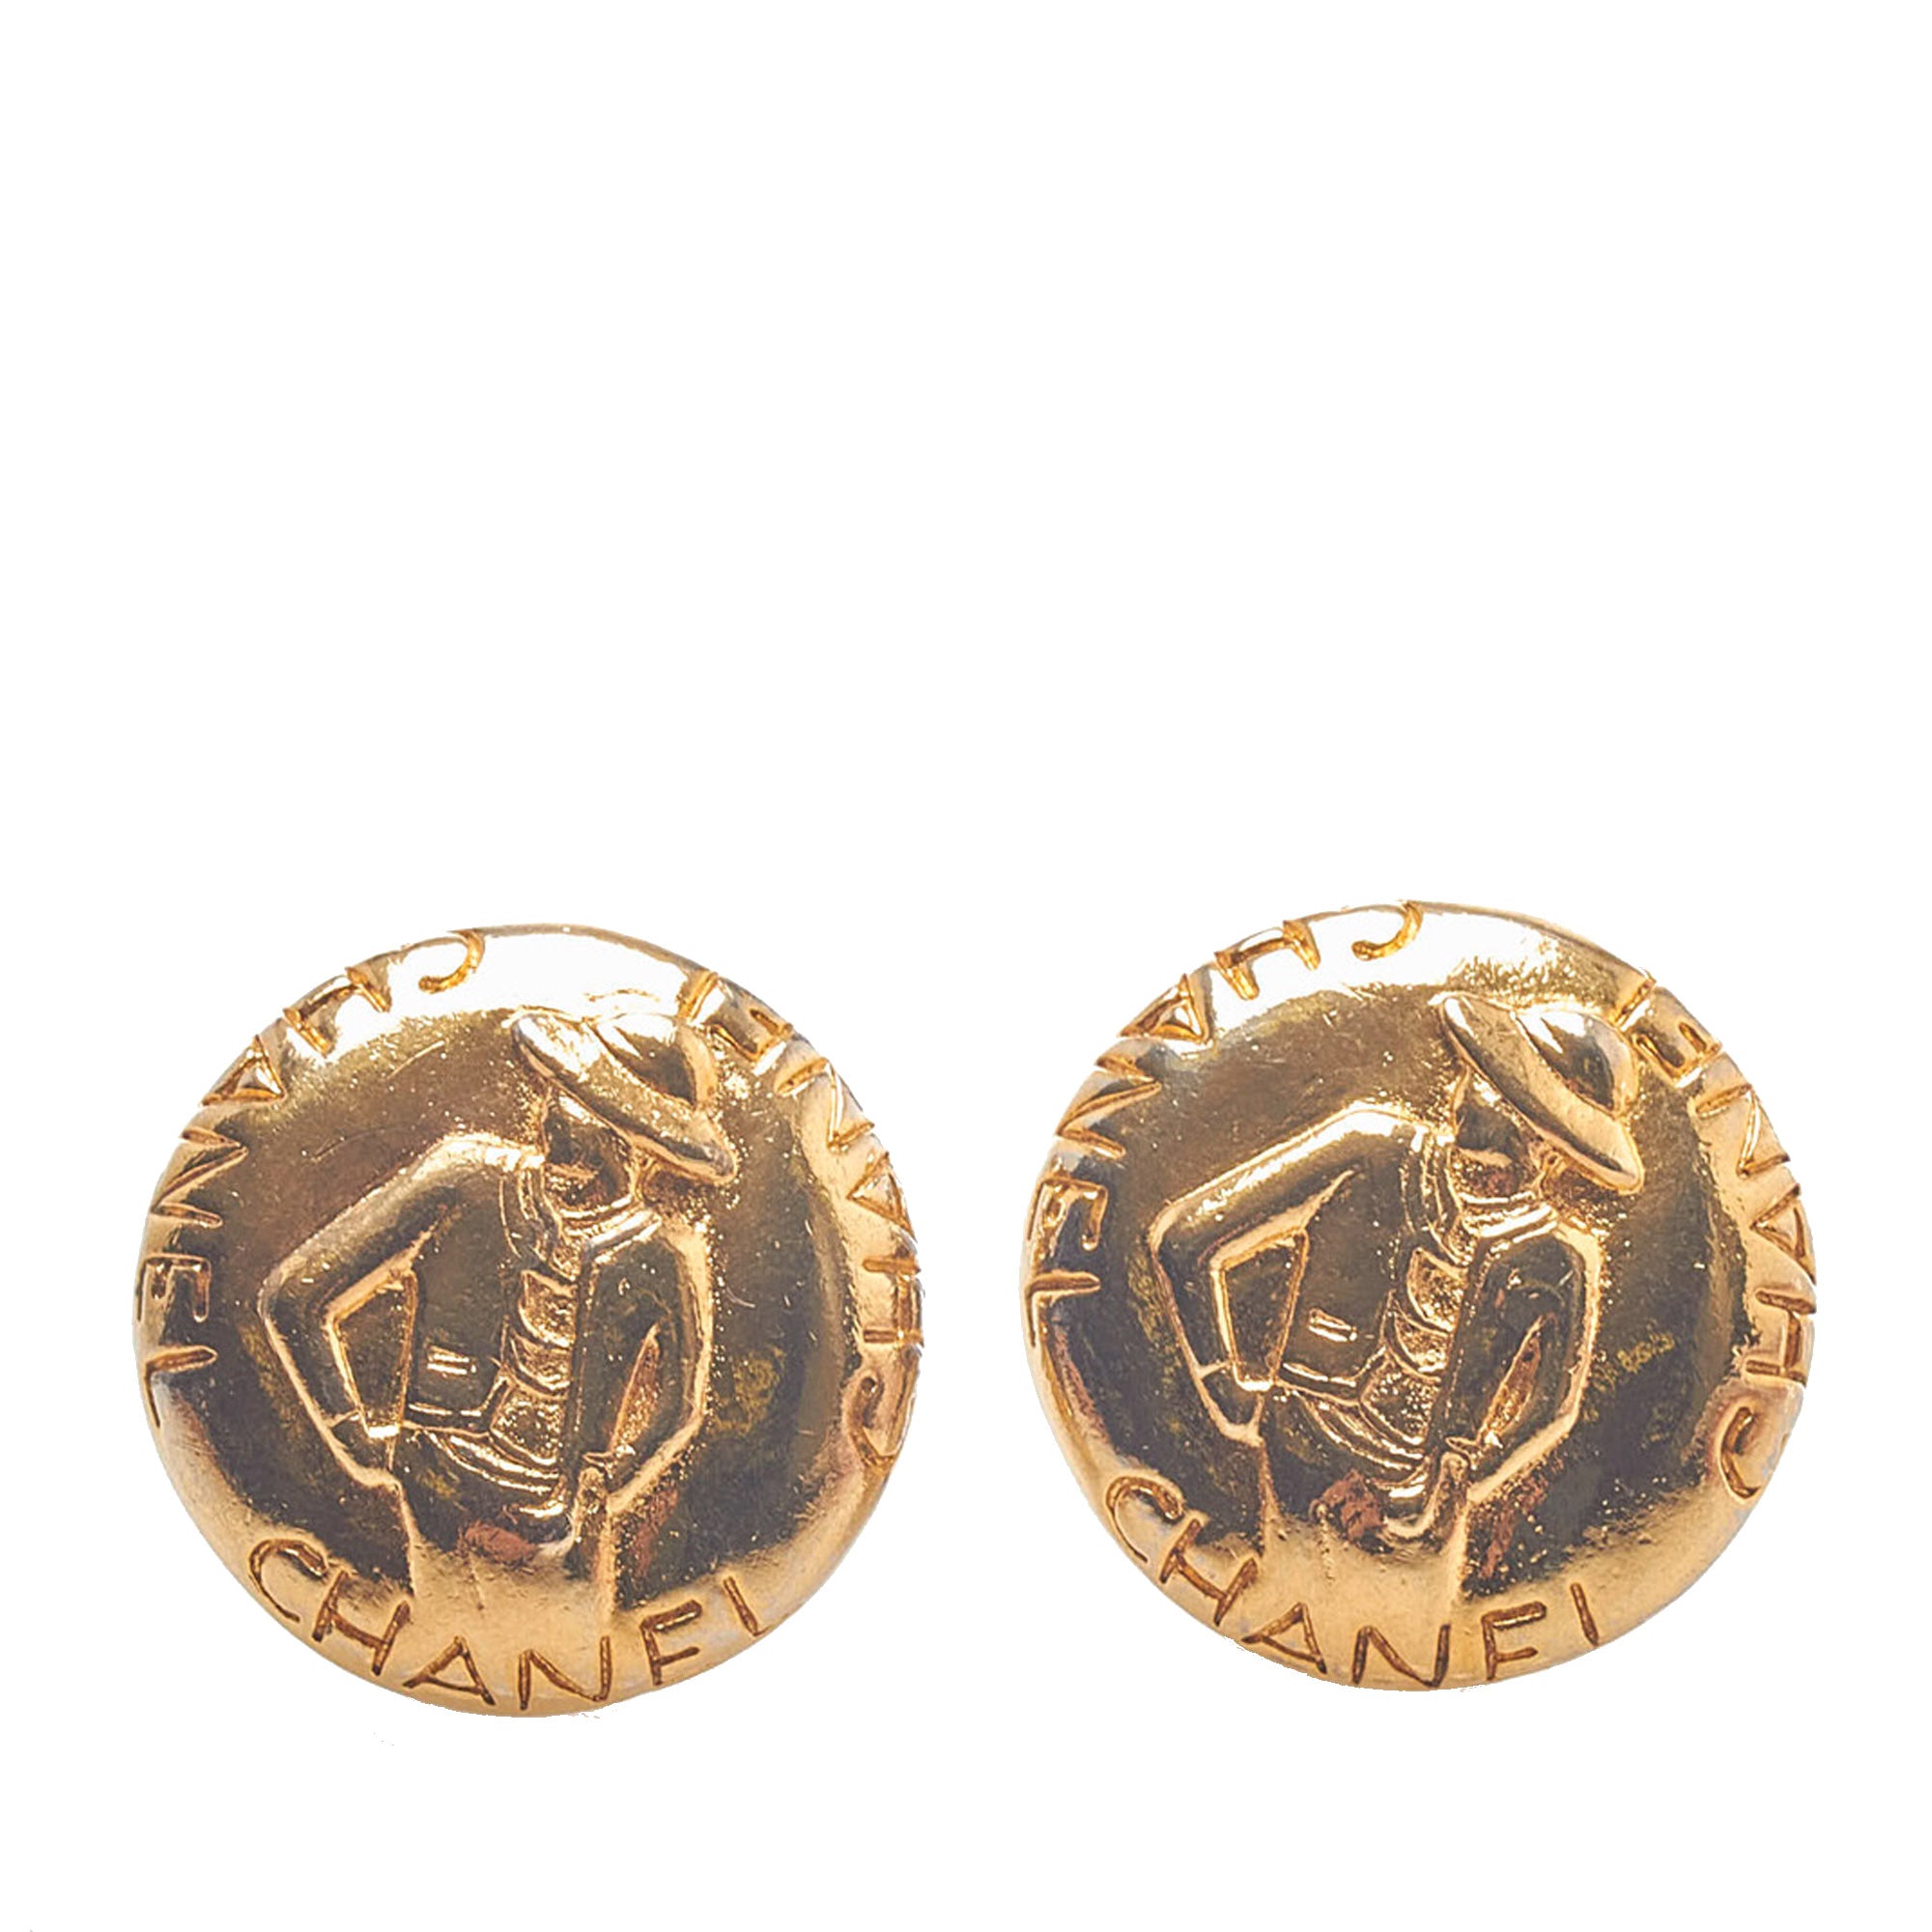 Gold Chanel Mademoiselle Coco Chanel Clip-On Earrings – Designer Revival